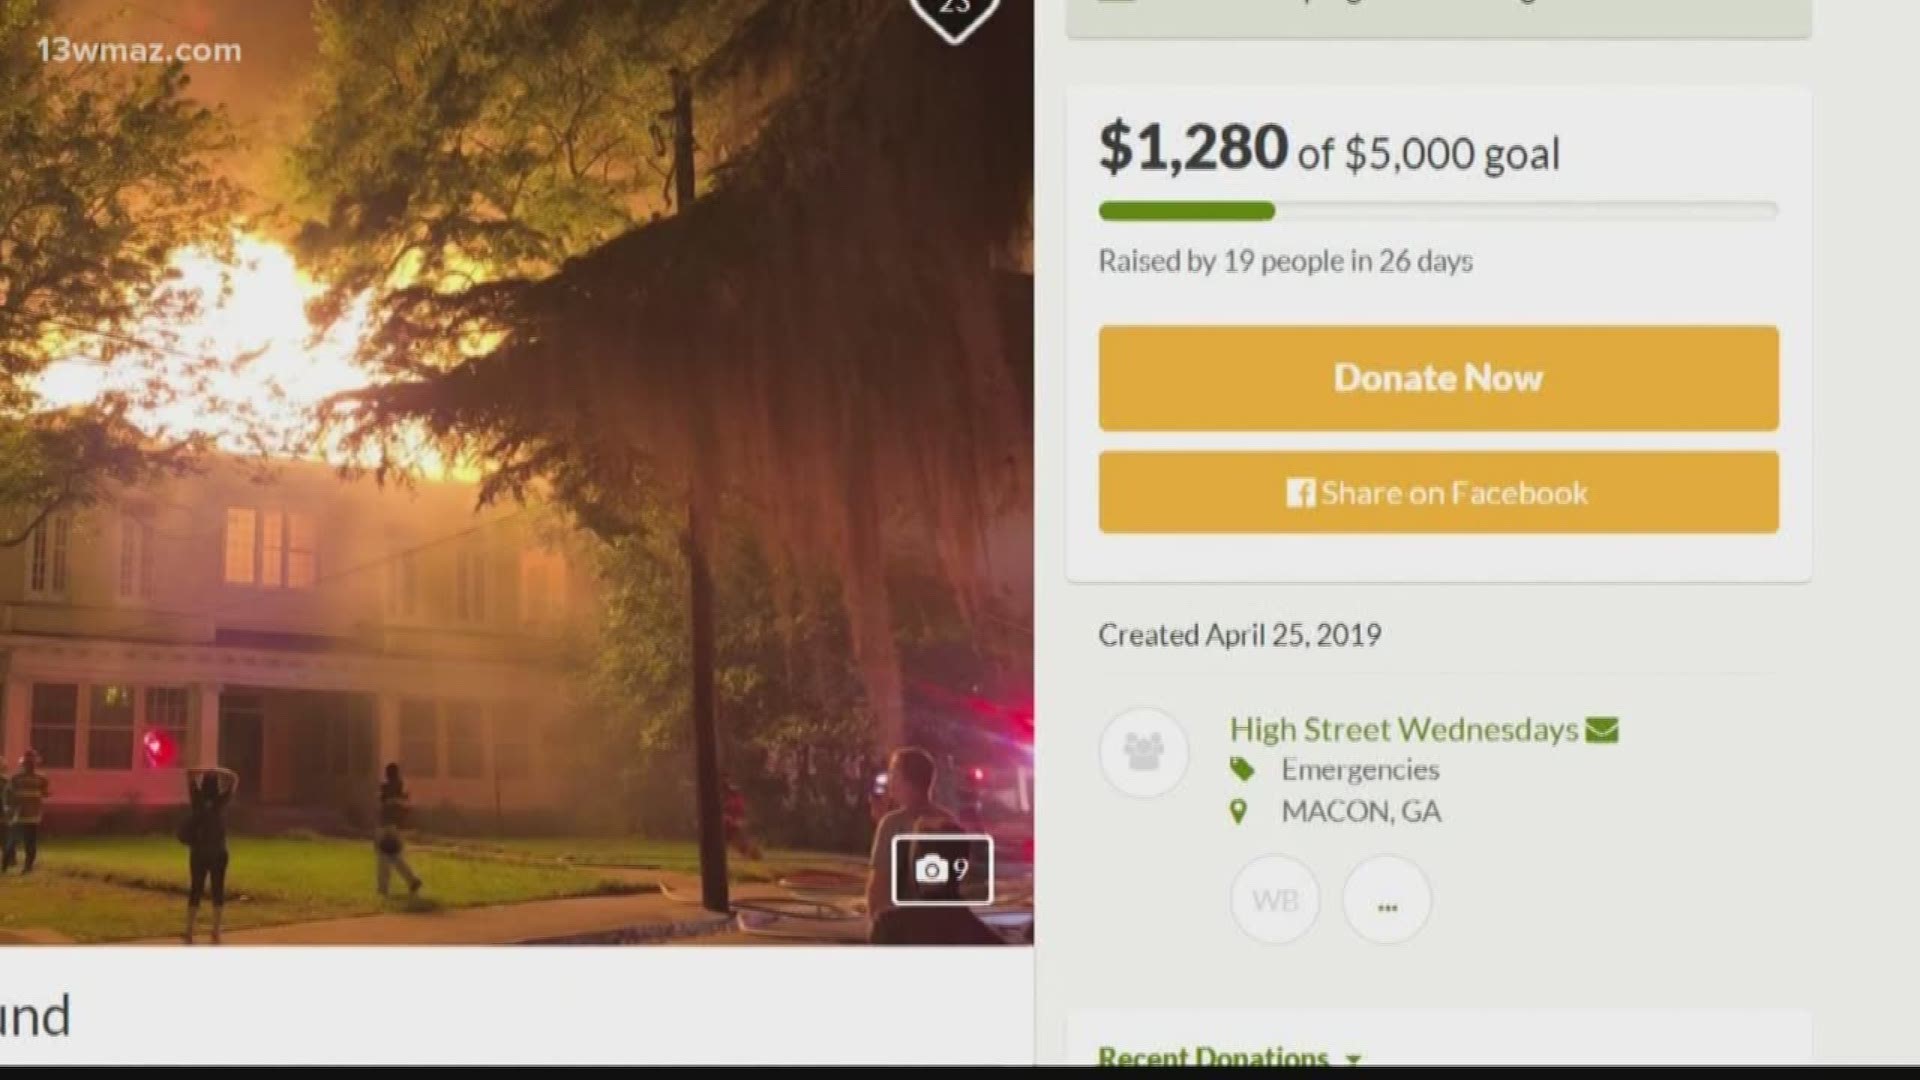 About a month ago a fire burned at least 3 historic homes on High Street. Now, teen Wylie Byrne is raising money to help the people who live there bounce back.